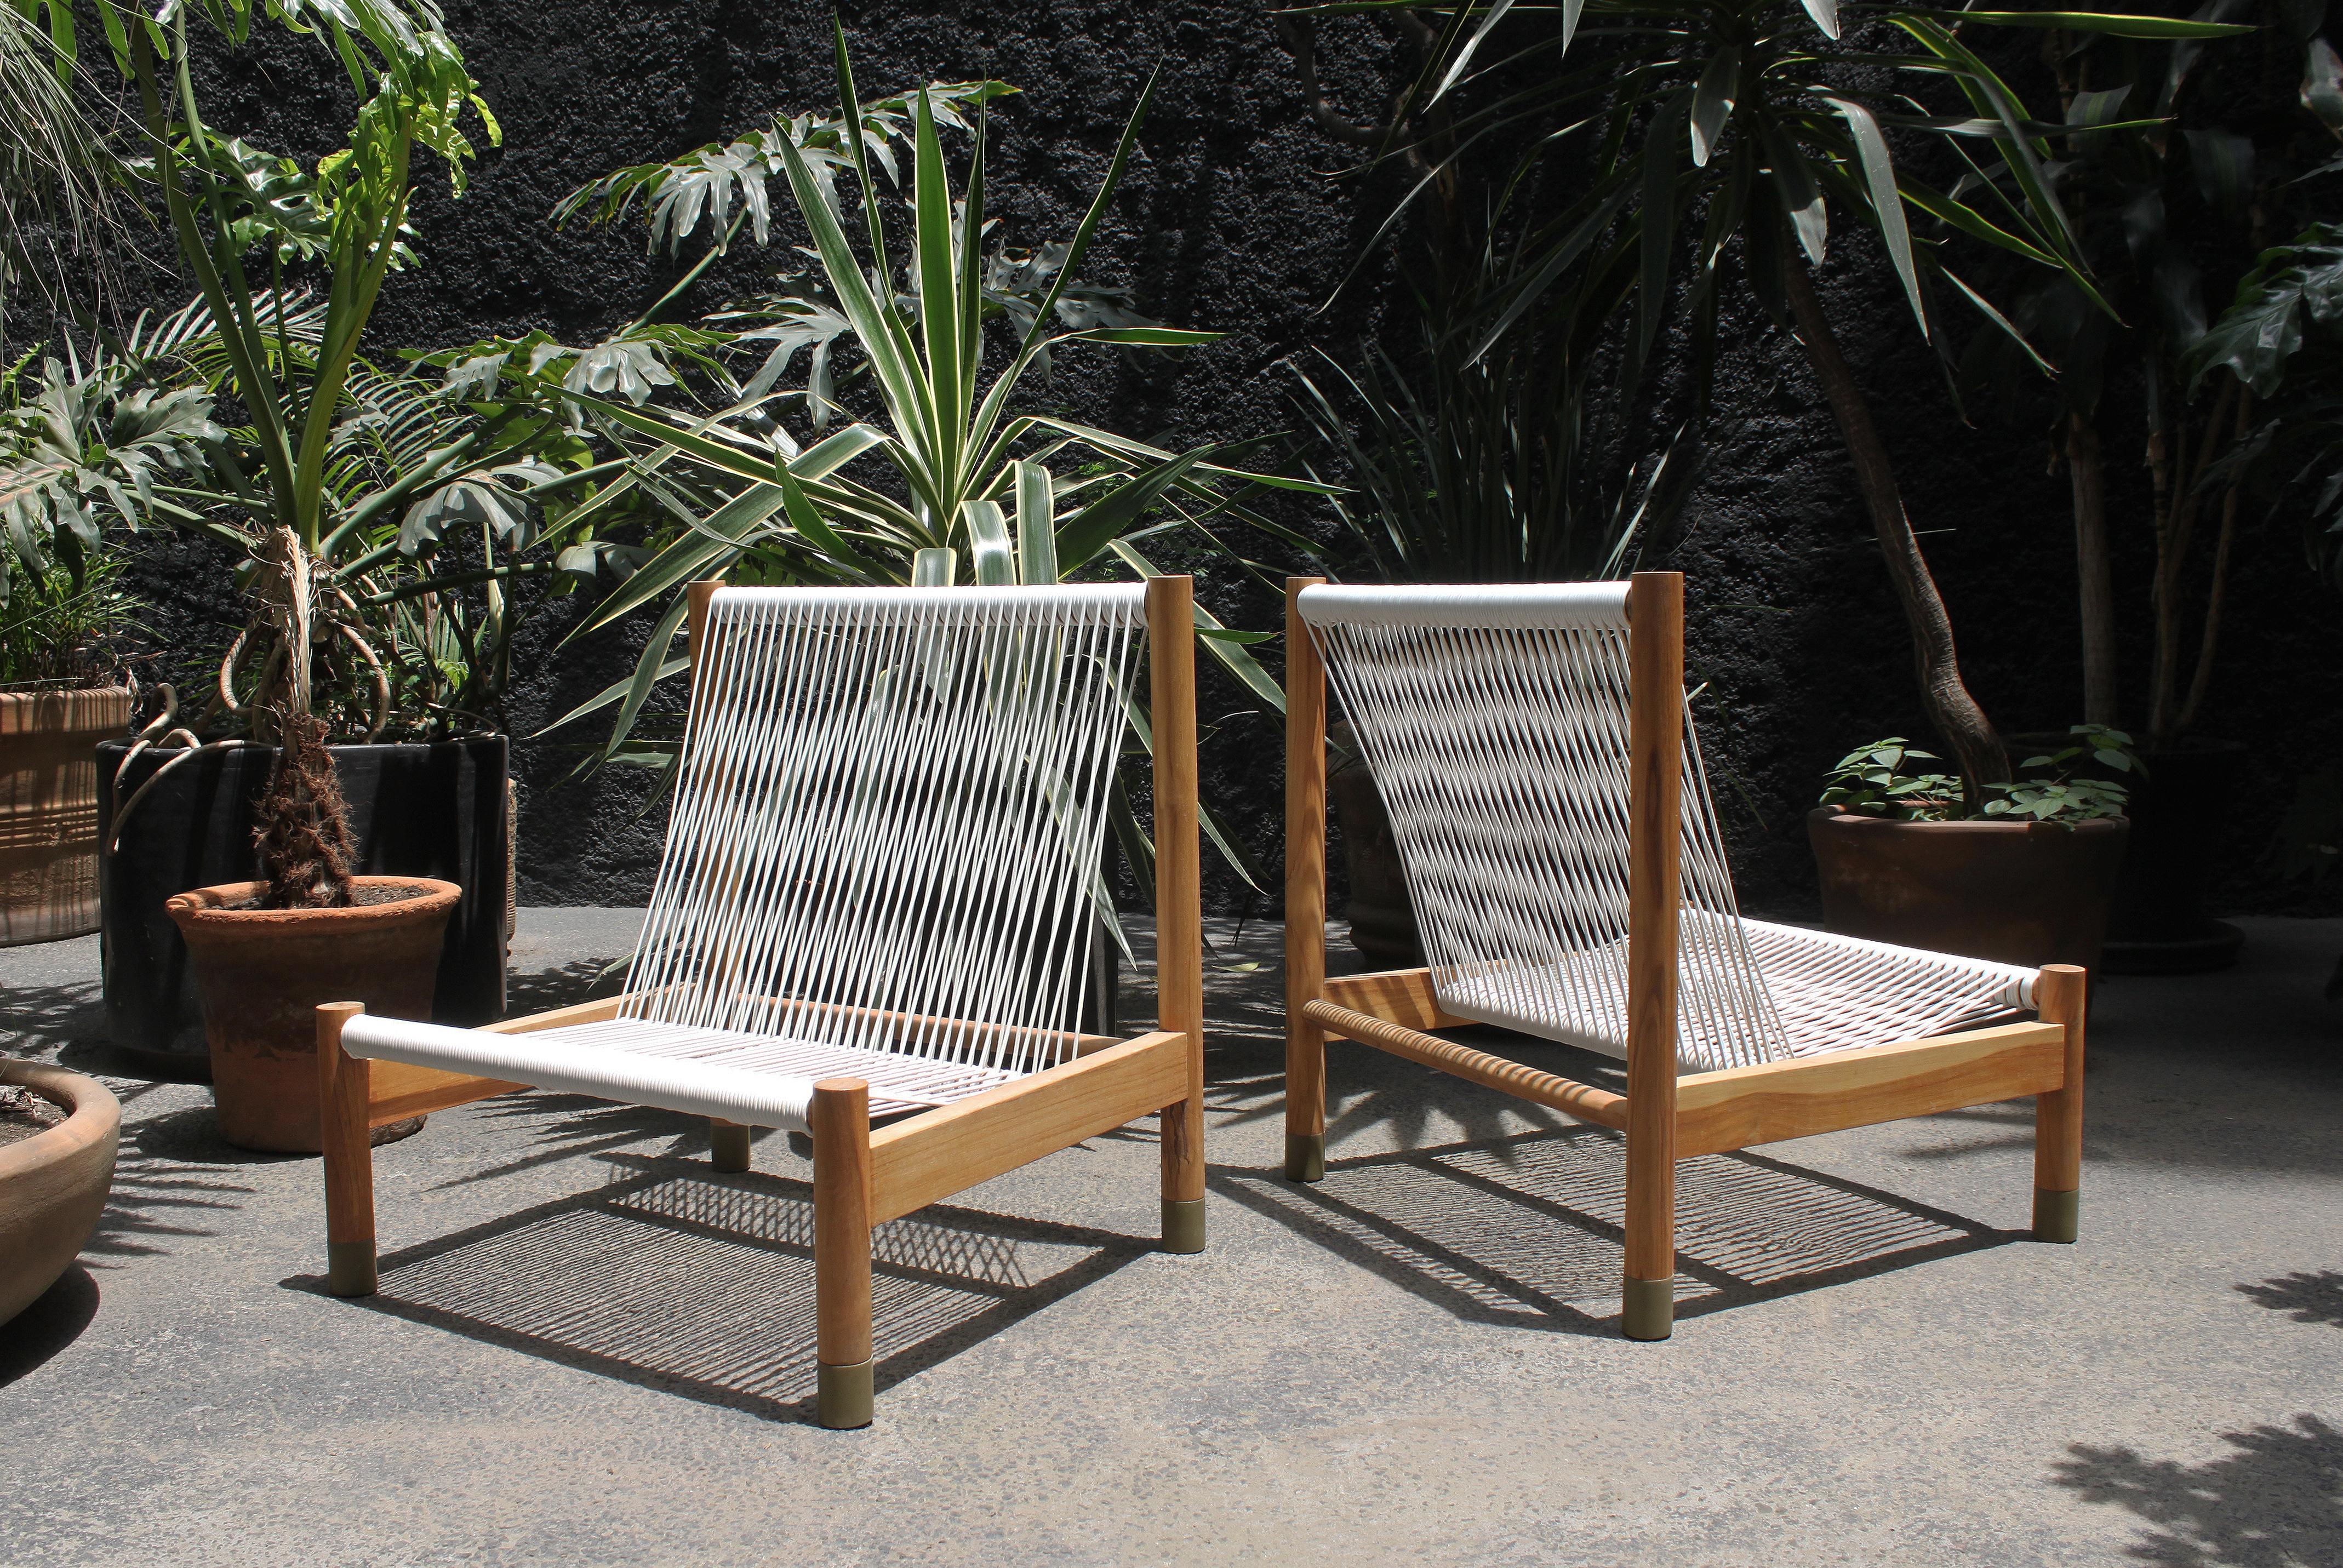 Teak Al Sol Outdoor Chair, Maria Beckmann, Represented by Tuleste Factory For Sale